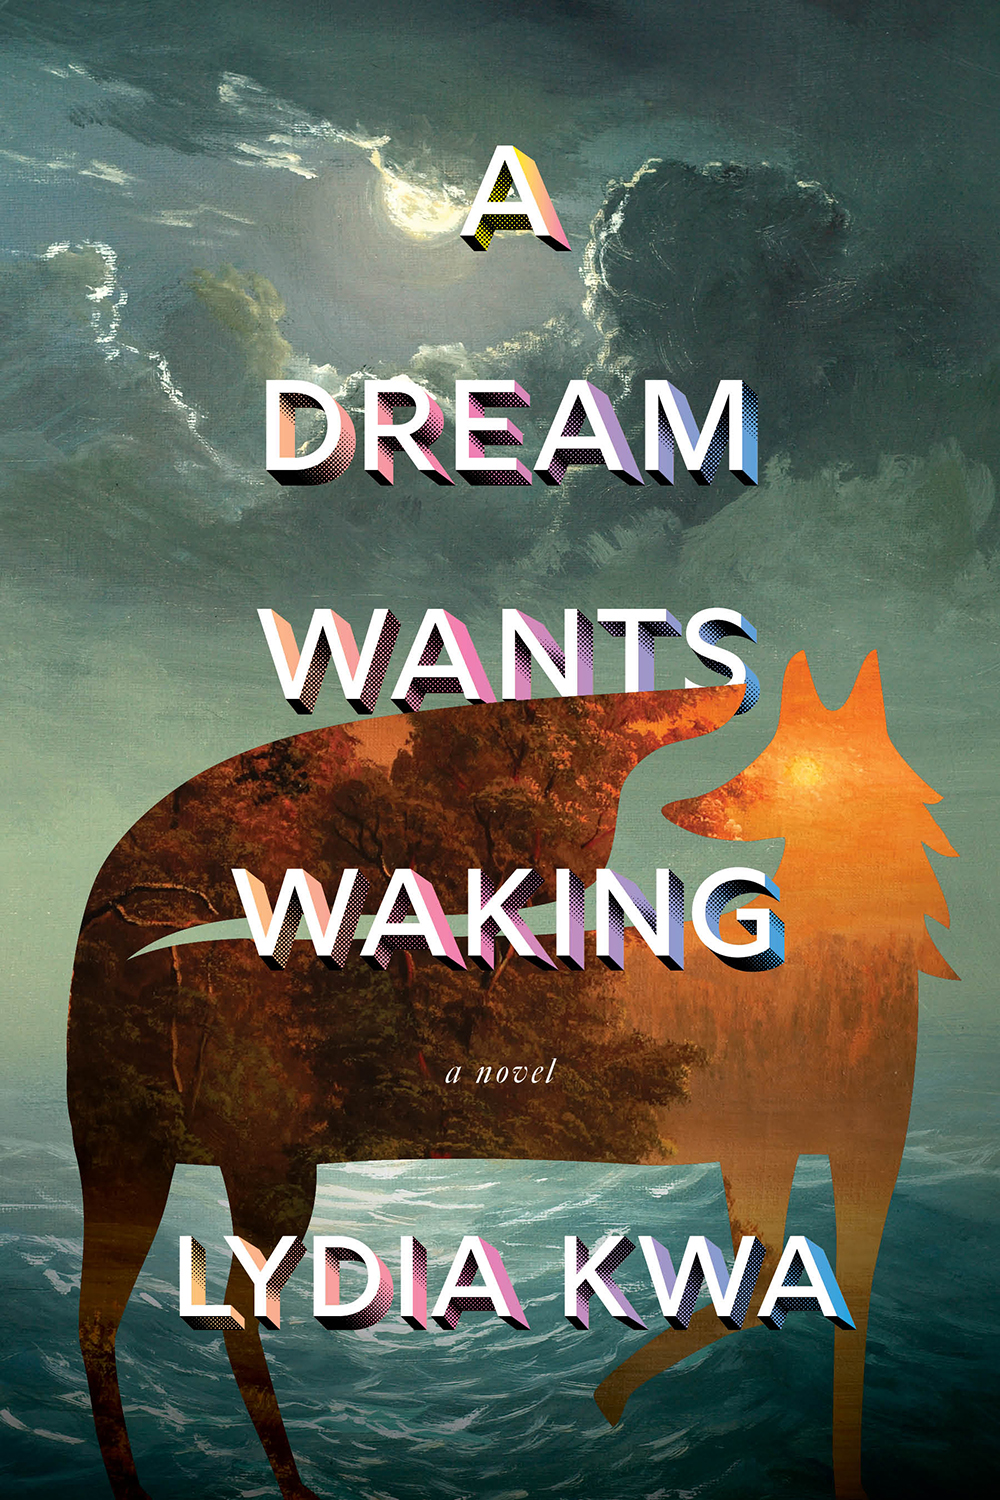 The cover of A Dream Wants Waking by Lydia Kwa